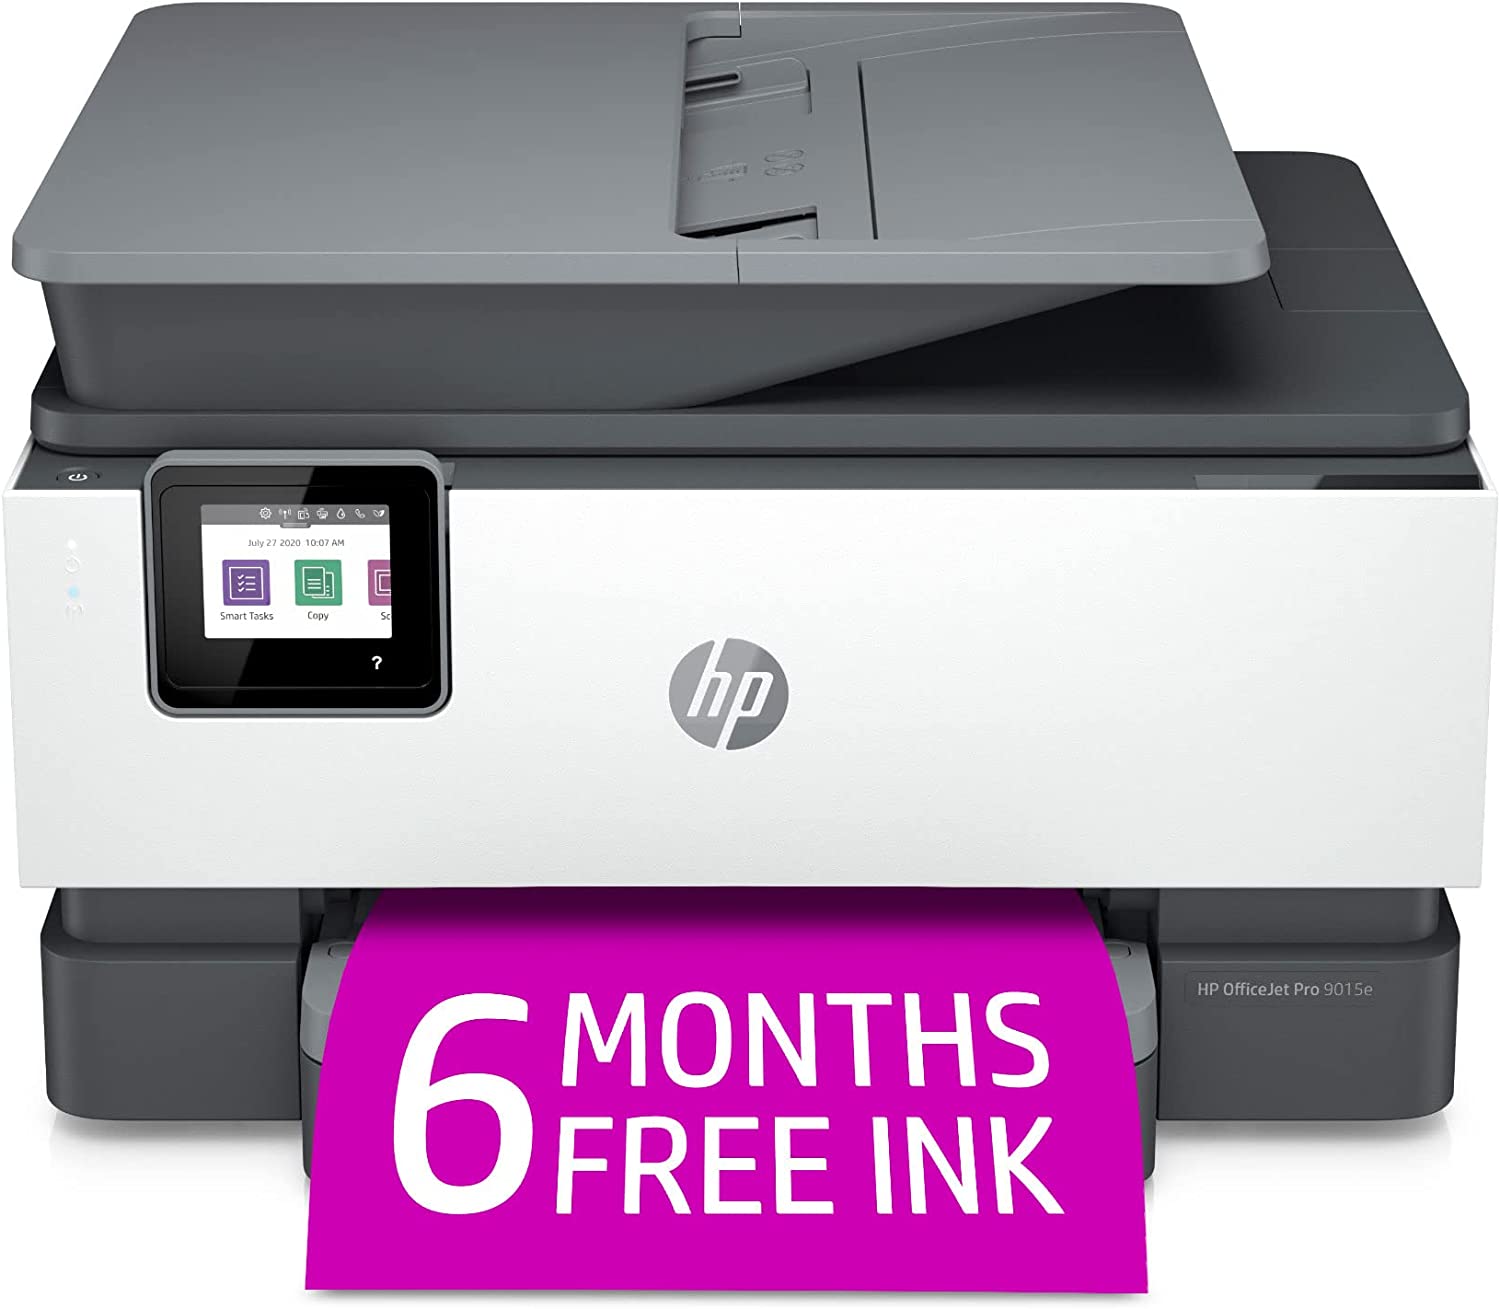 HP OfficeJet Pro 9015e Wireless Color All-in-One [...]